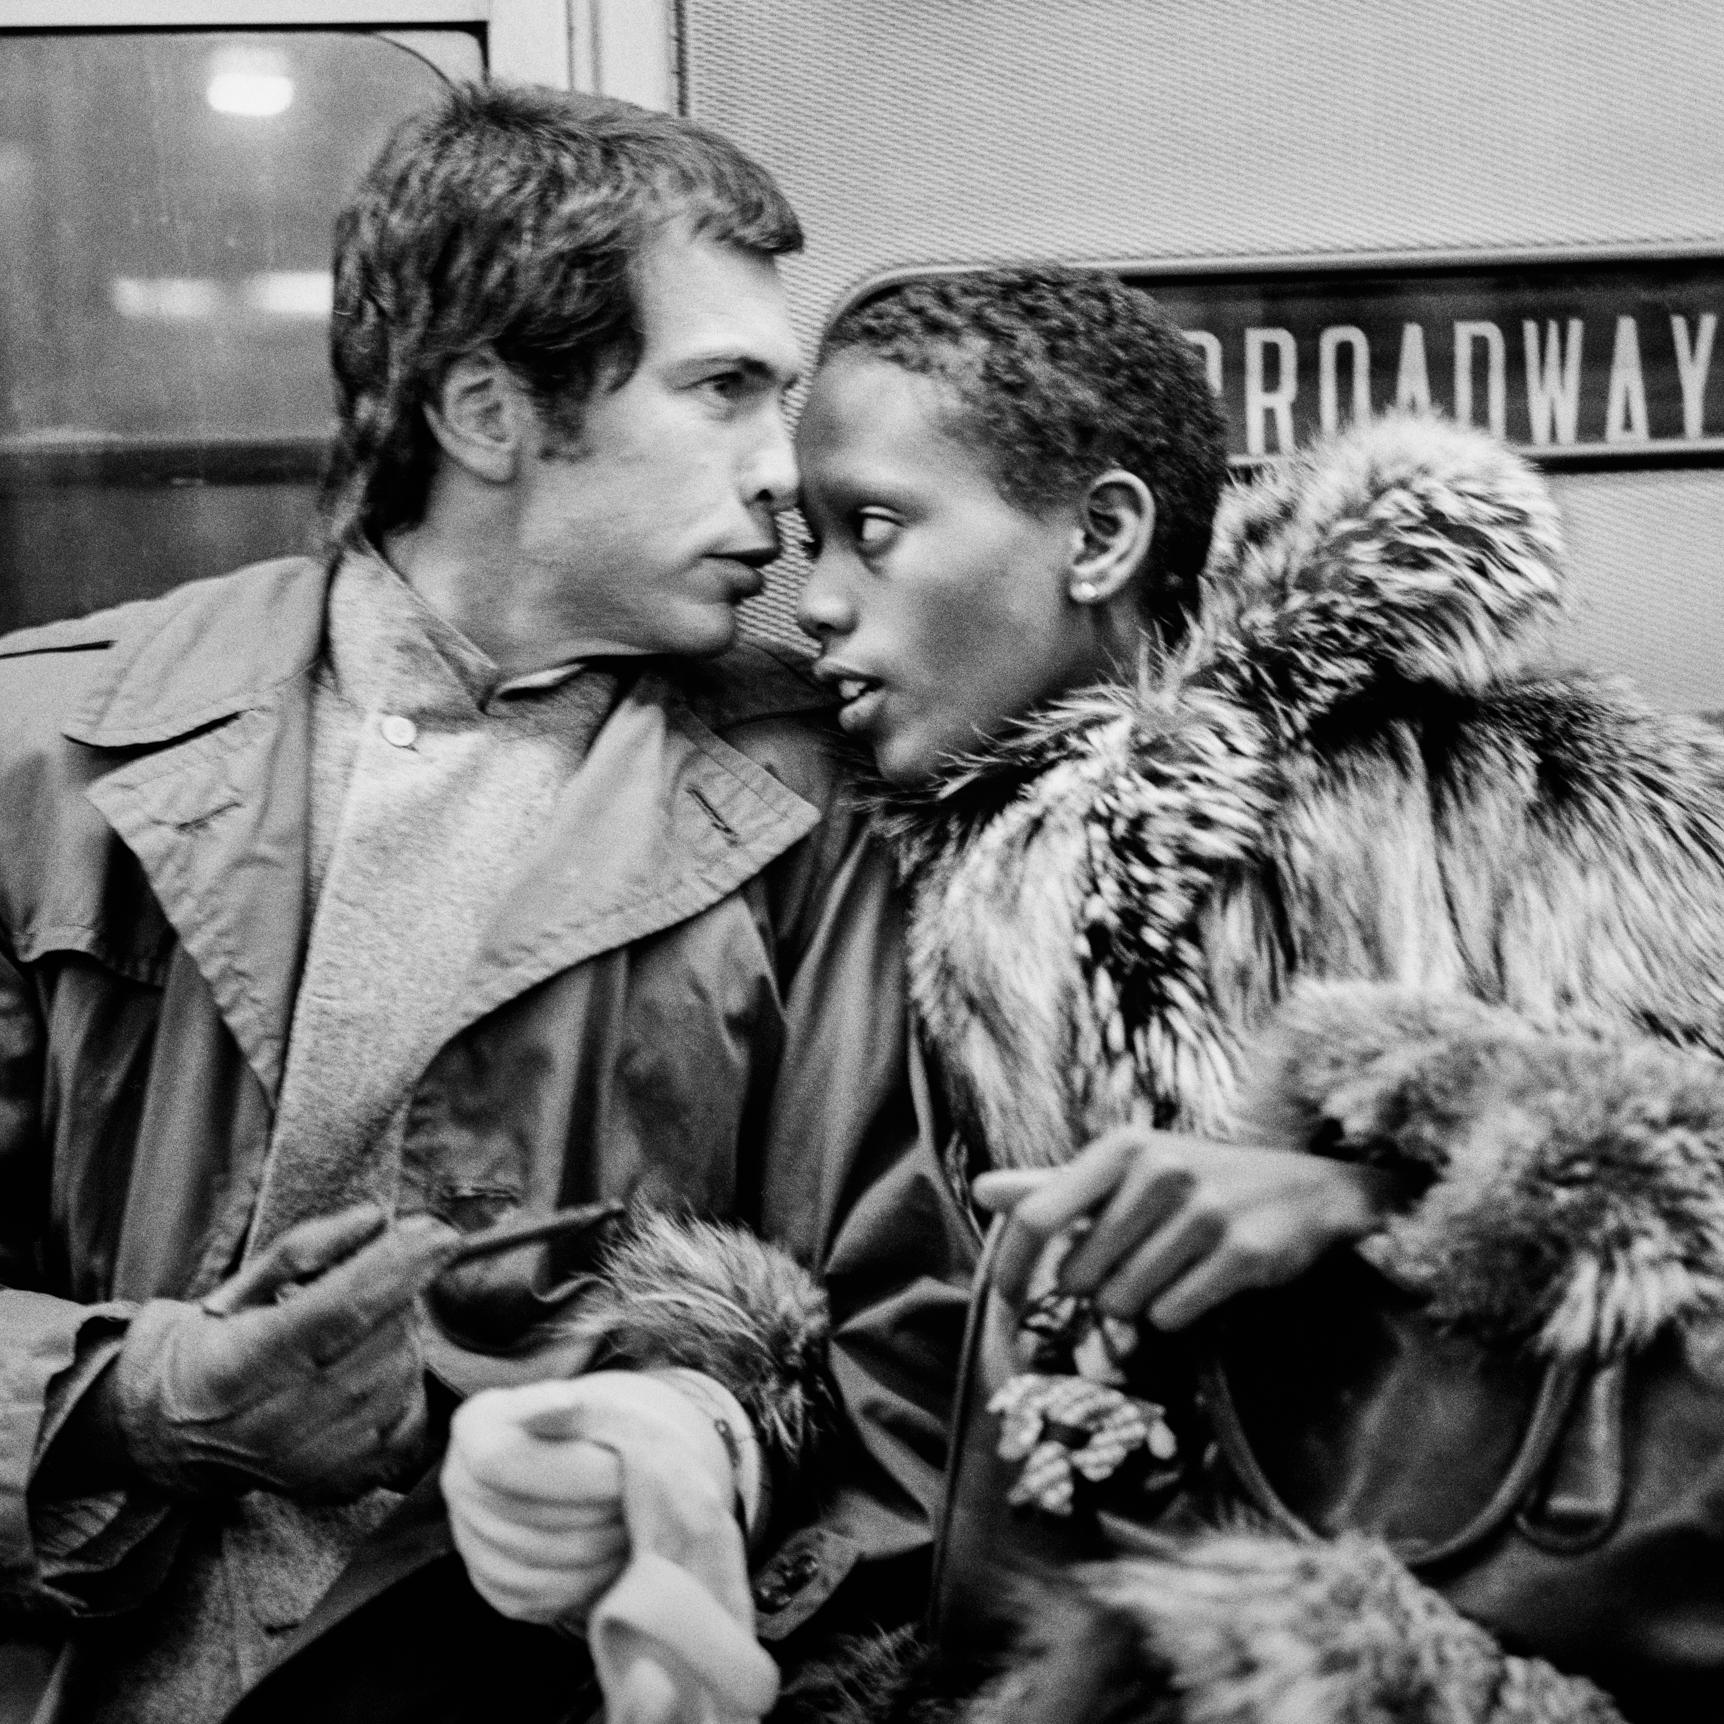 Jean-Paul Goude & Toukie Smith in NYC Subway, 1976 - Photograph by Jonathan Becker